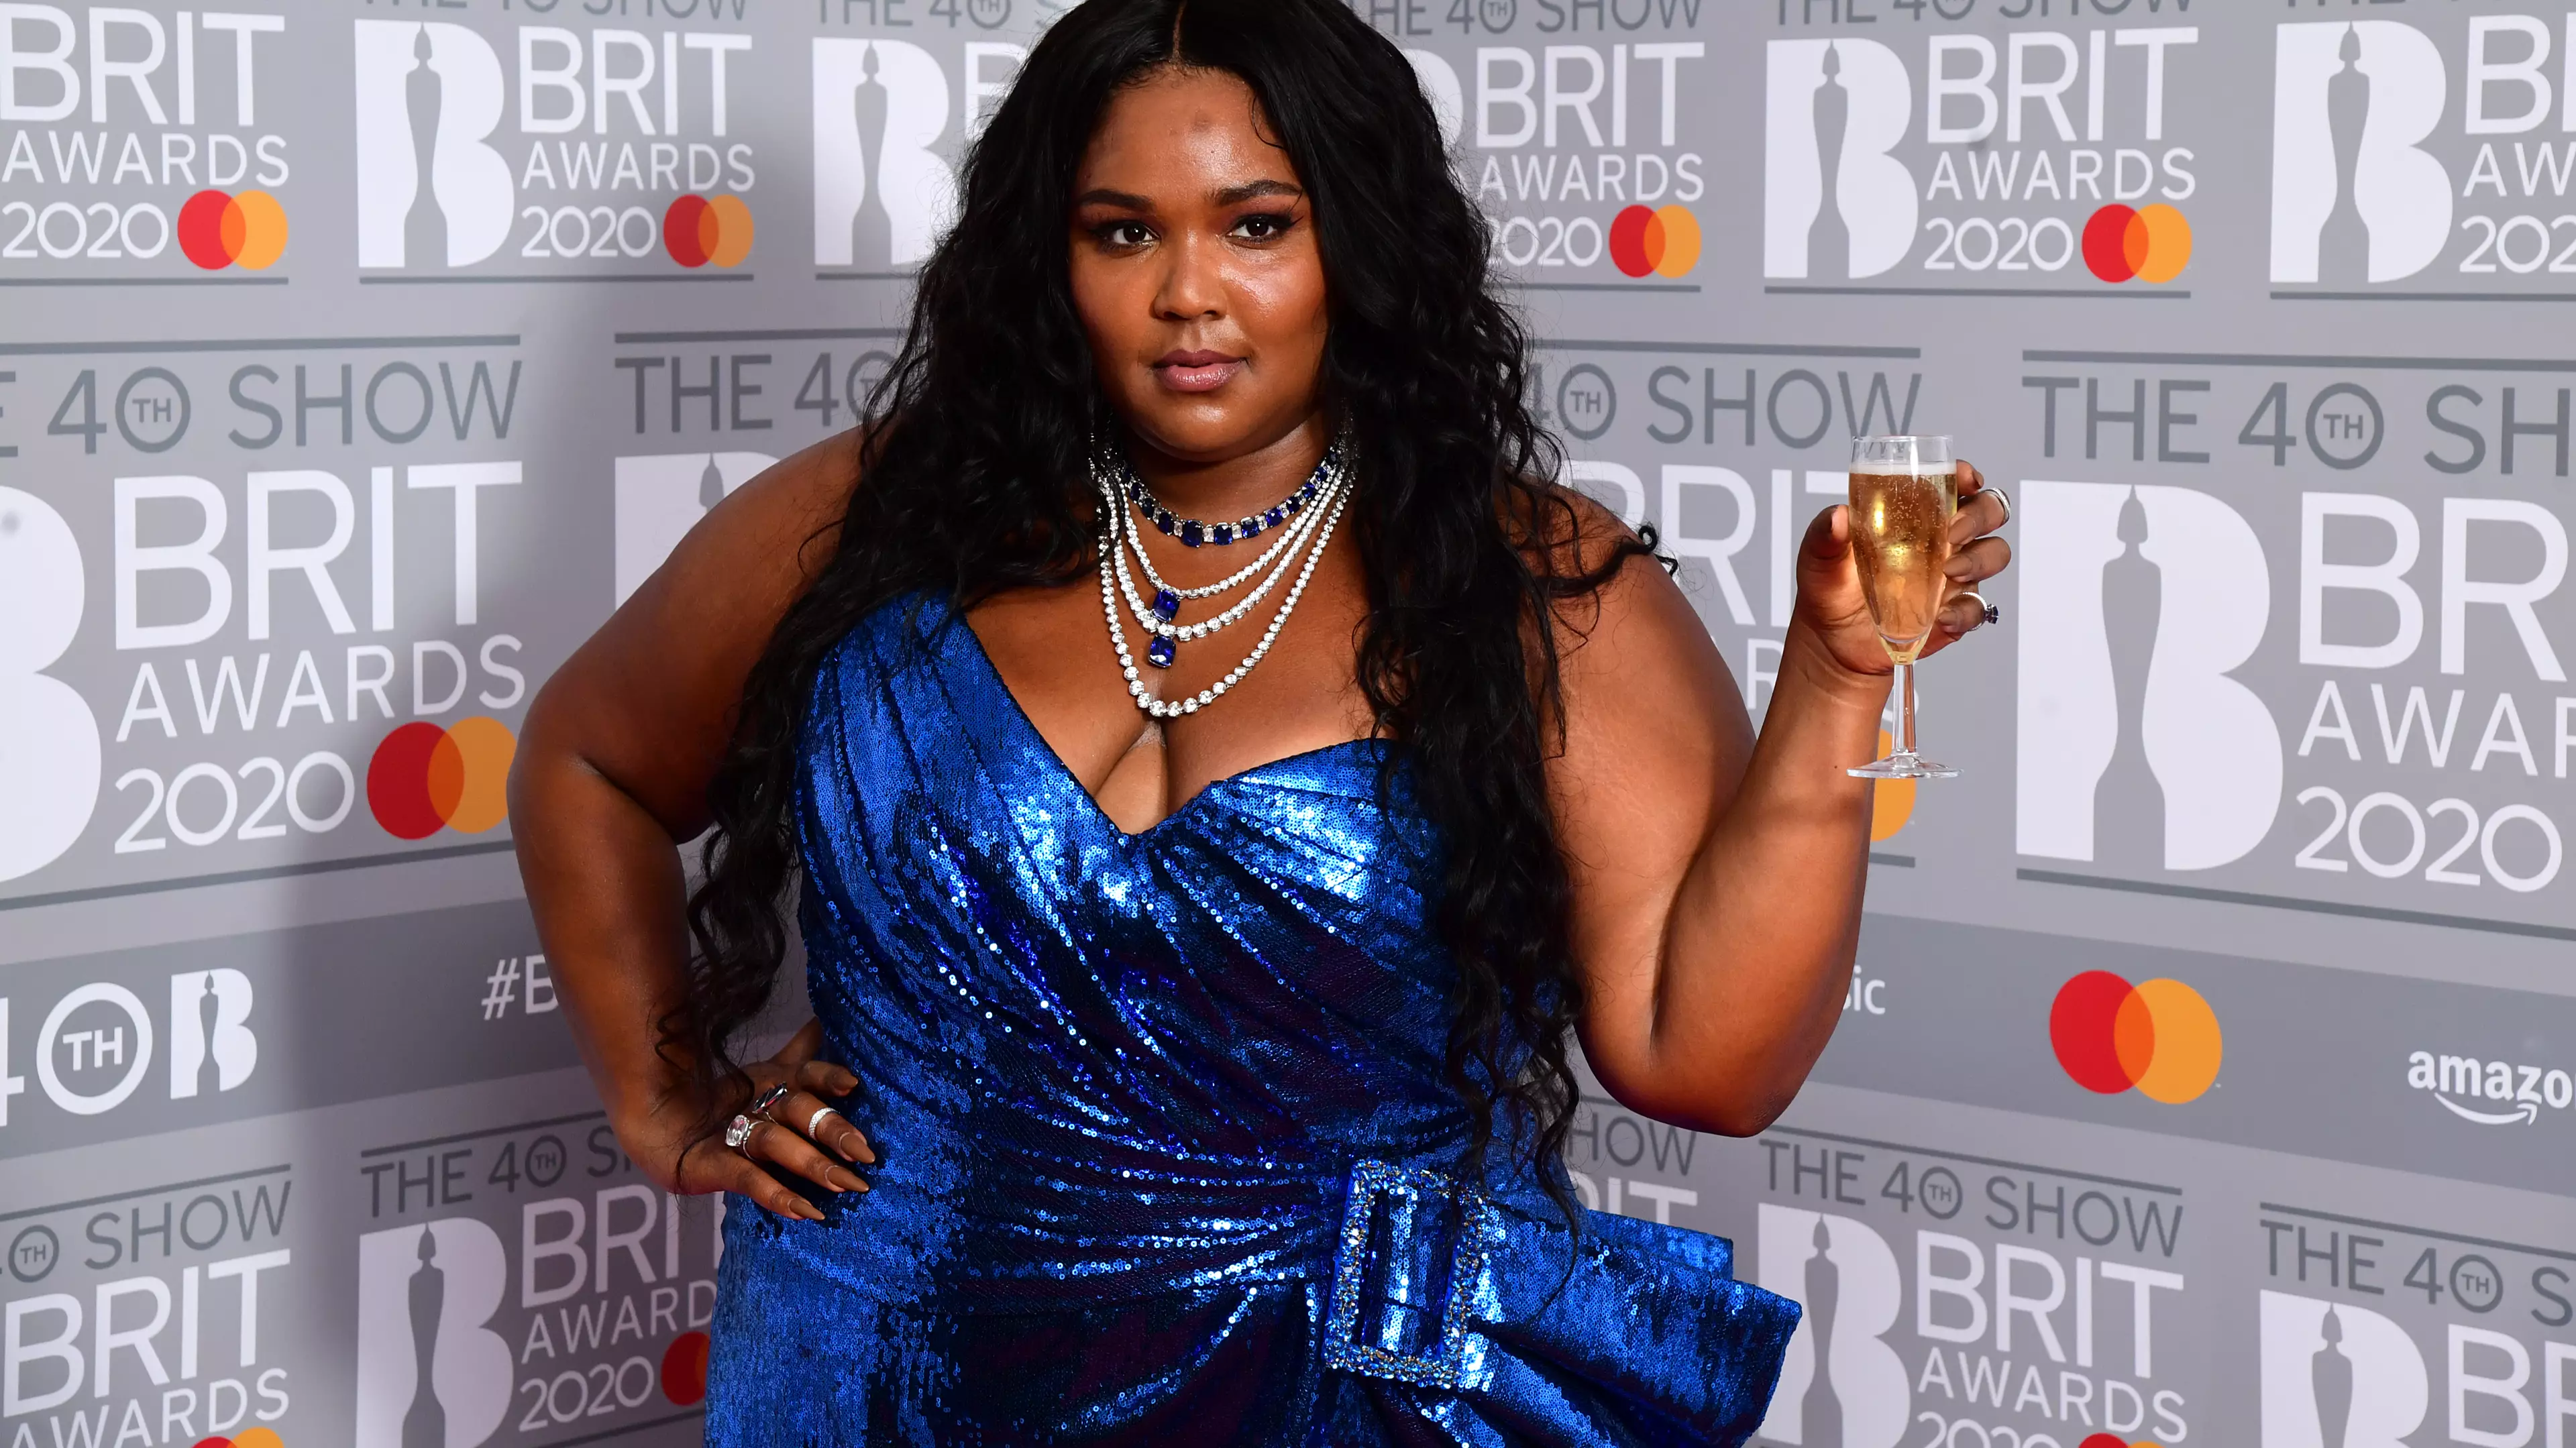 Lizzo Reveals Her Plans For A Future 'Date' With Chris Evans